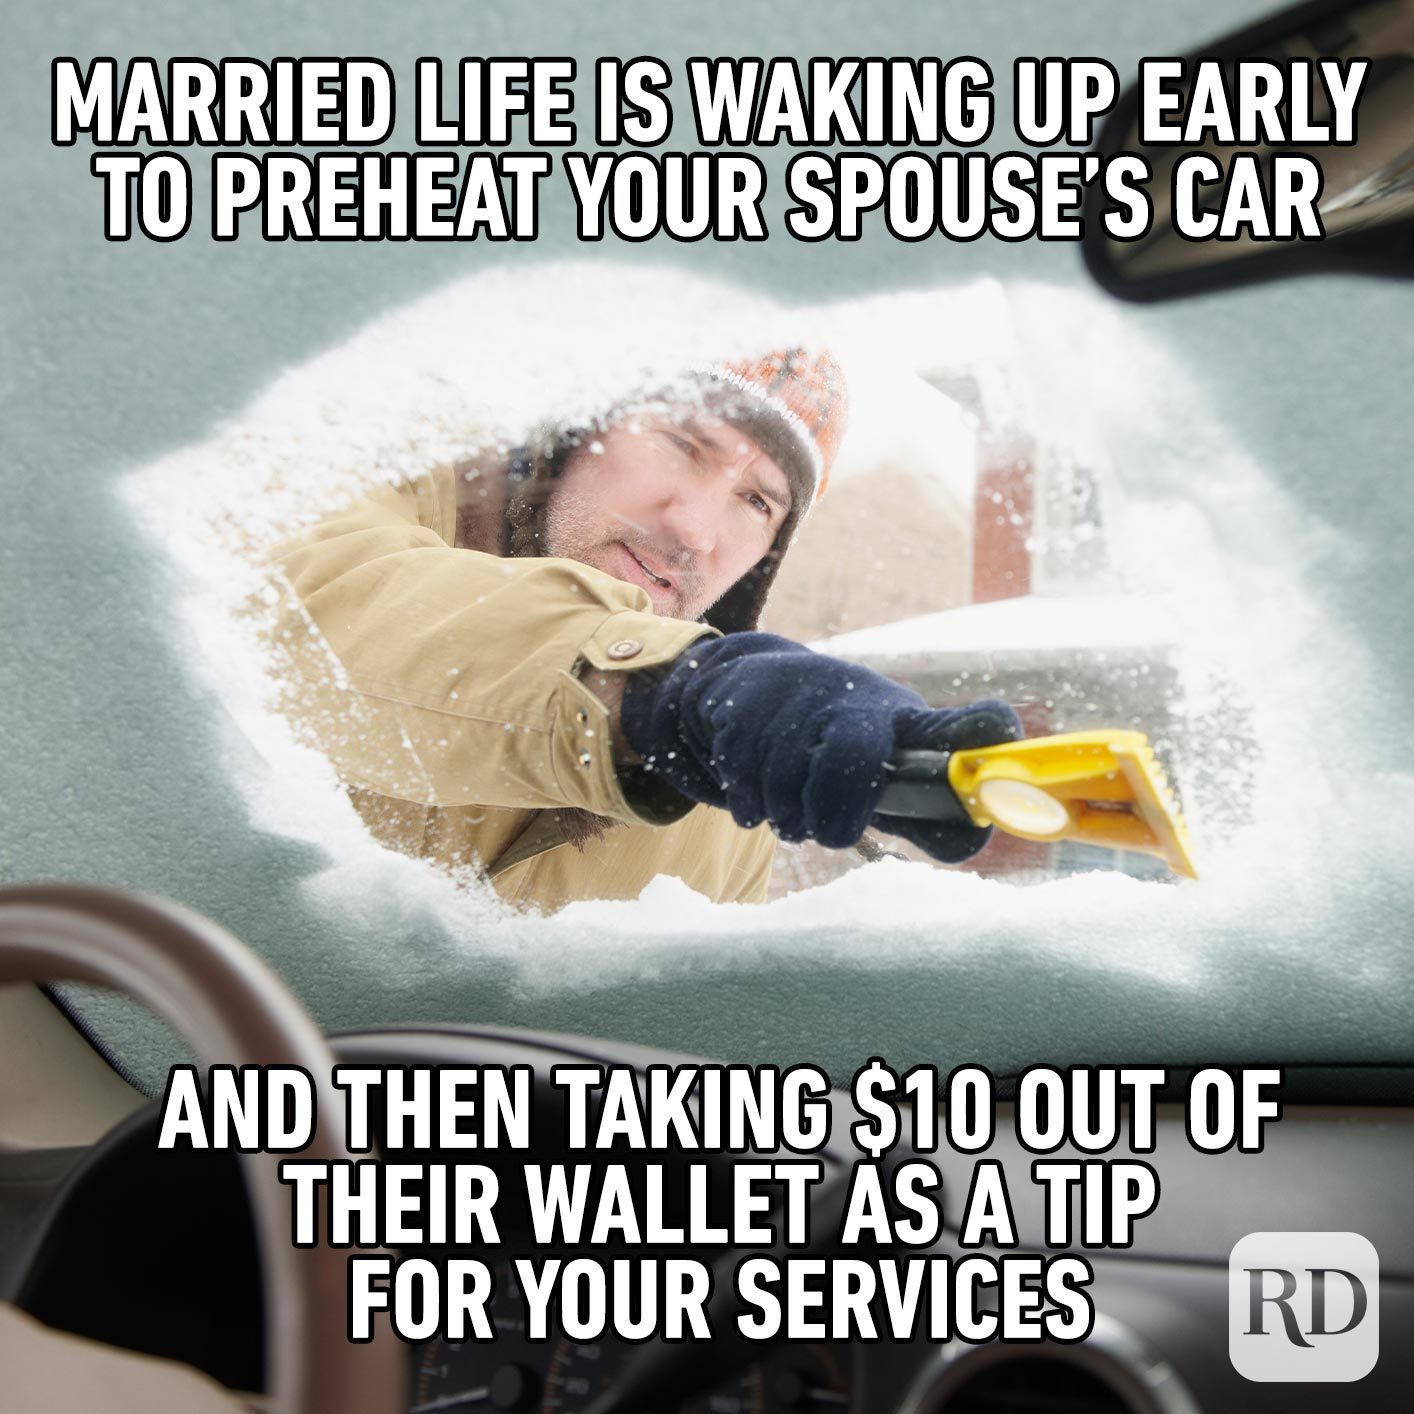 Man scraping snow off a car windshield. Meme text: Married life is waking up early to preheat your spouse’s car and then taking $10 out of their wallet as a tip for your services